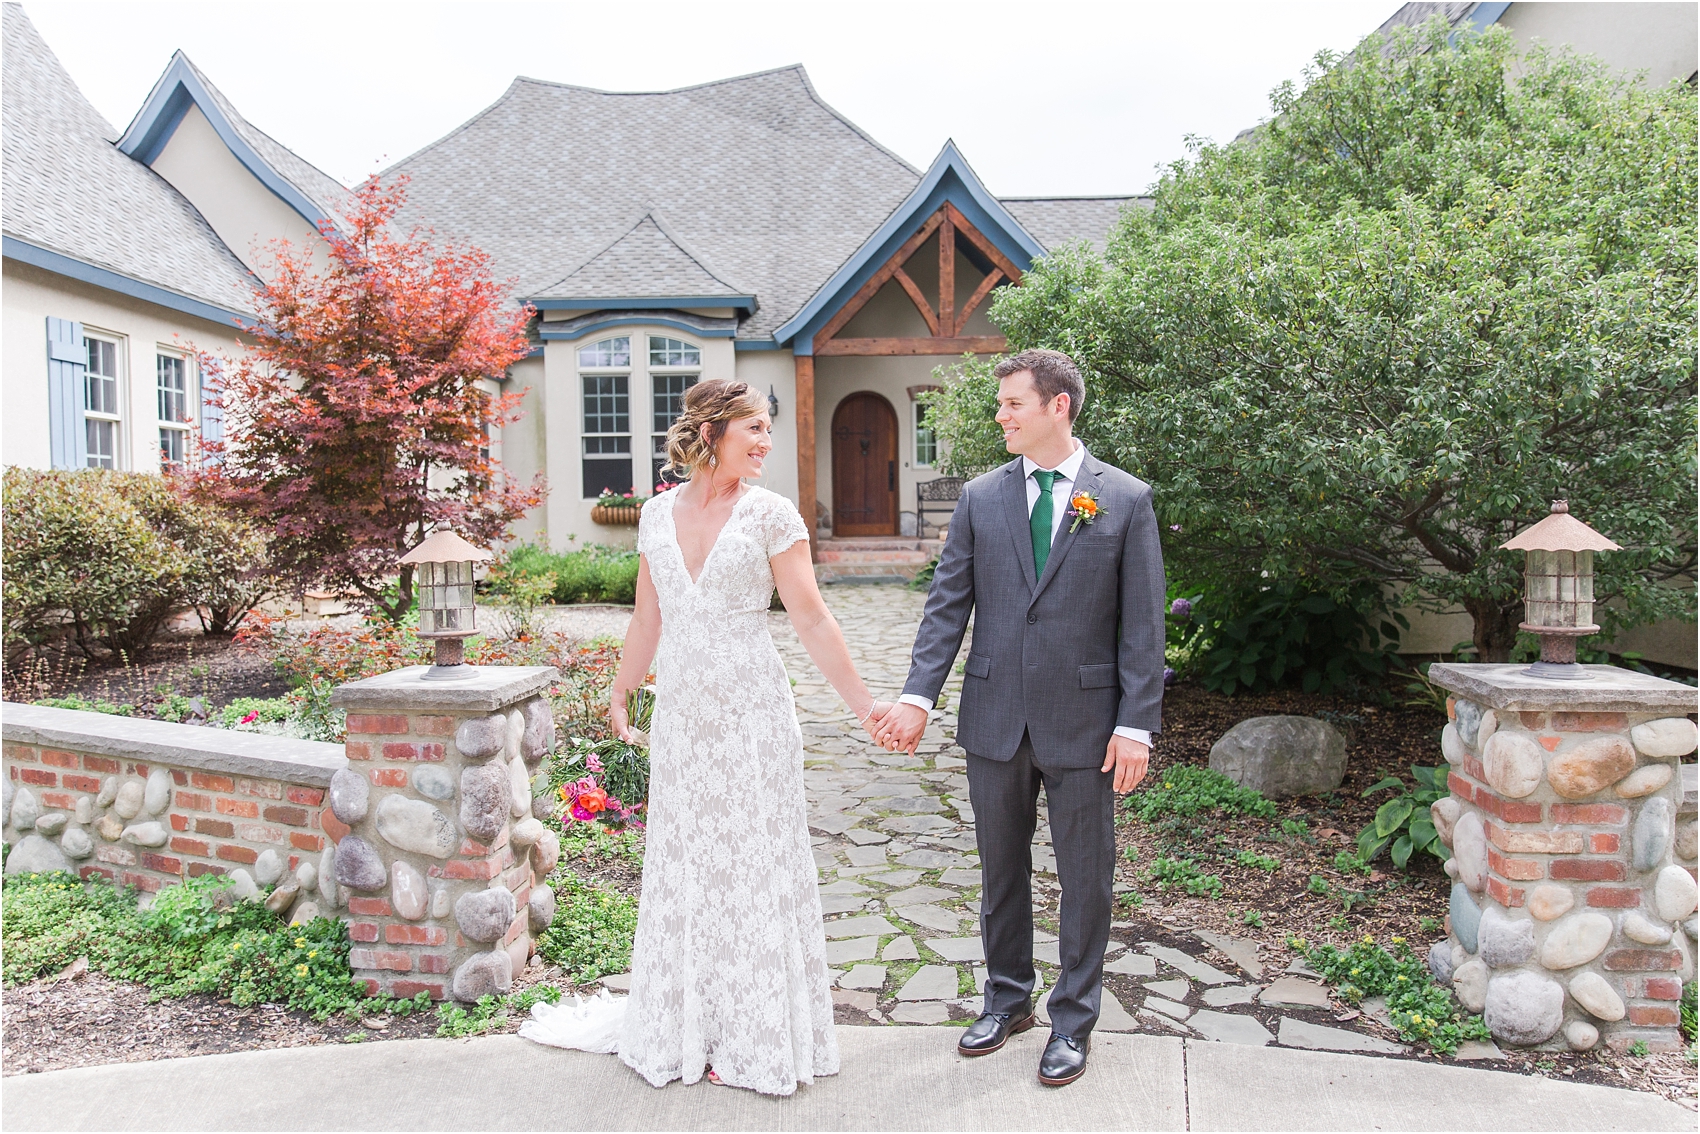 romantic-intimate-backyard-wedding-photos-at-private-estate-in-ann-arbor-mi-by-courtney-carolyn-photography_0060.jpg